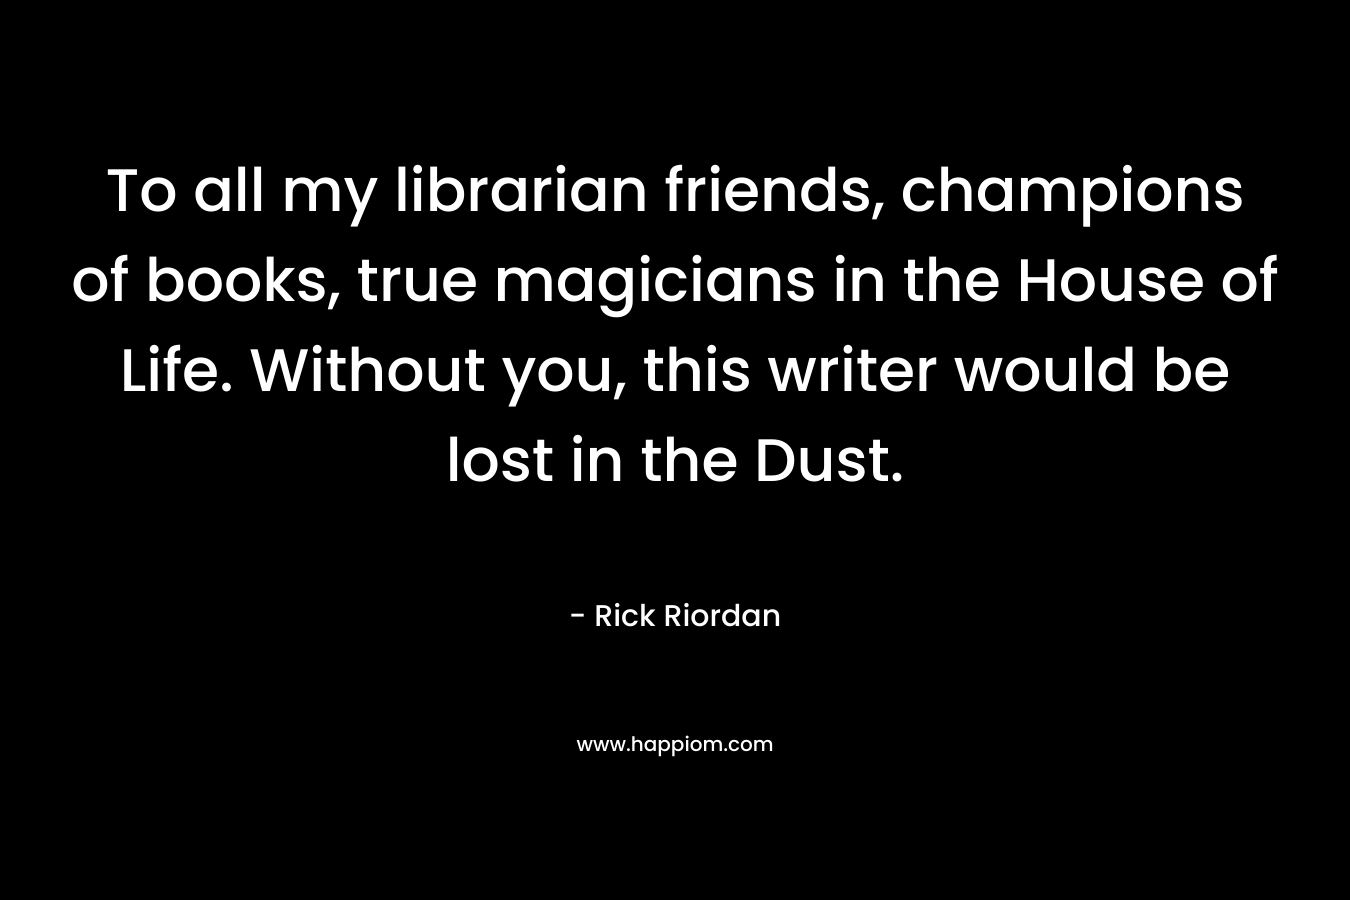 To all my librarian friends, champions of books, true magicians in the House of Life. Without you, this writer would be lost in the Dust.